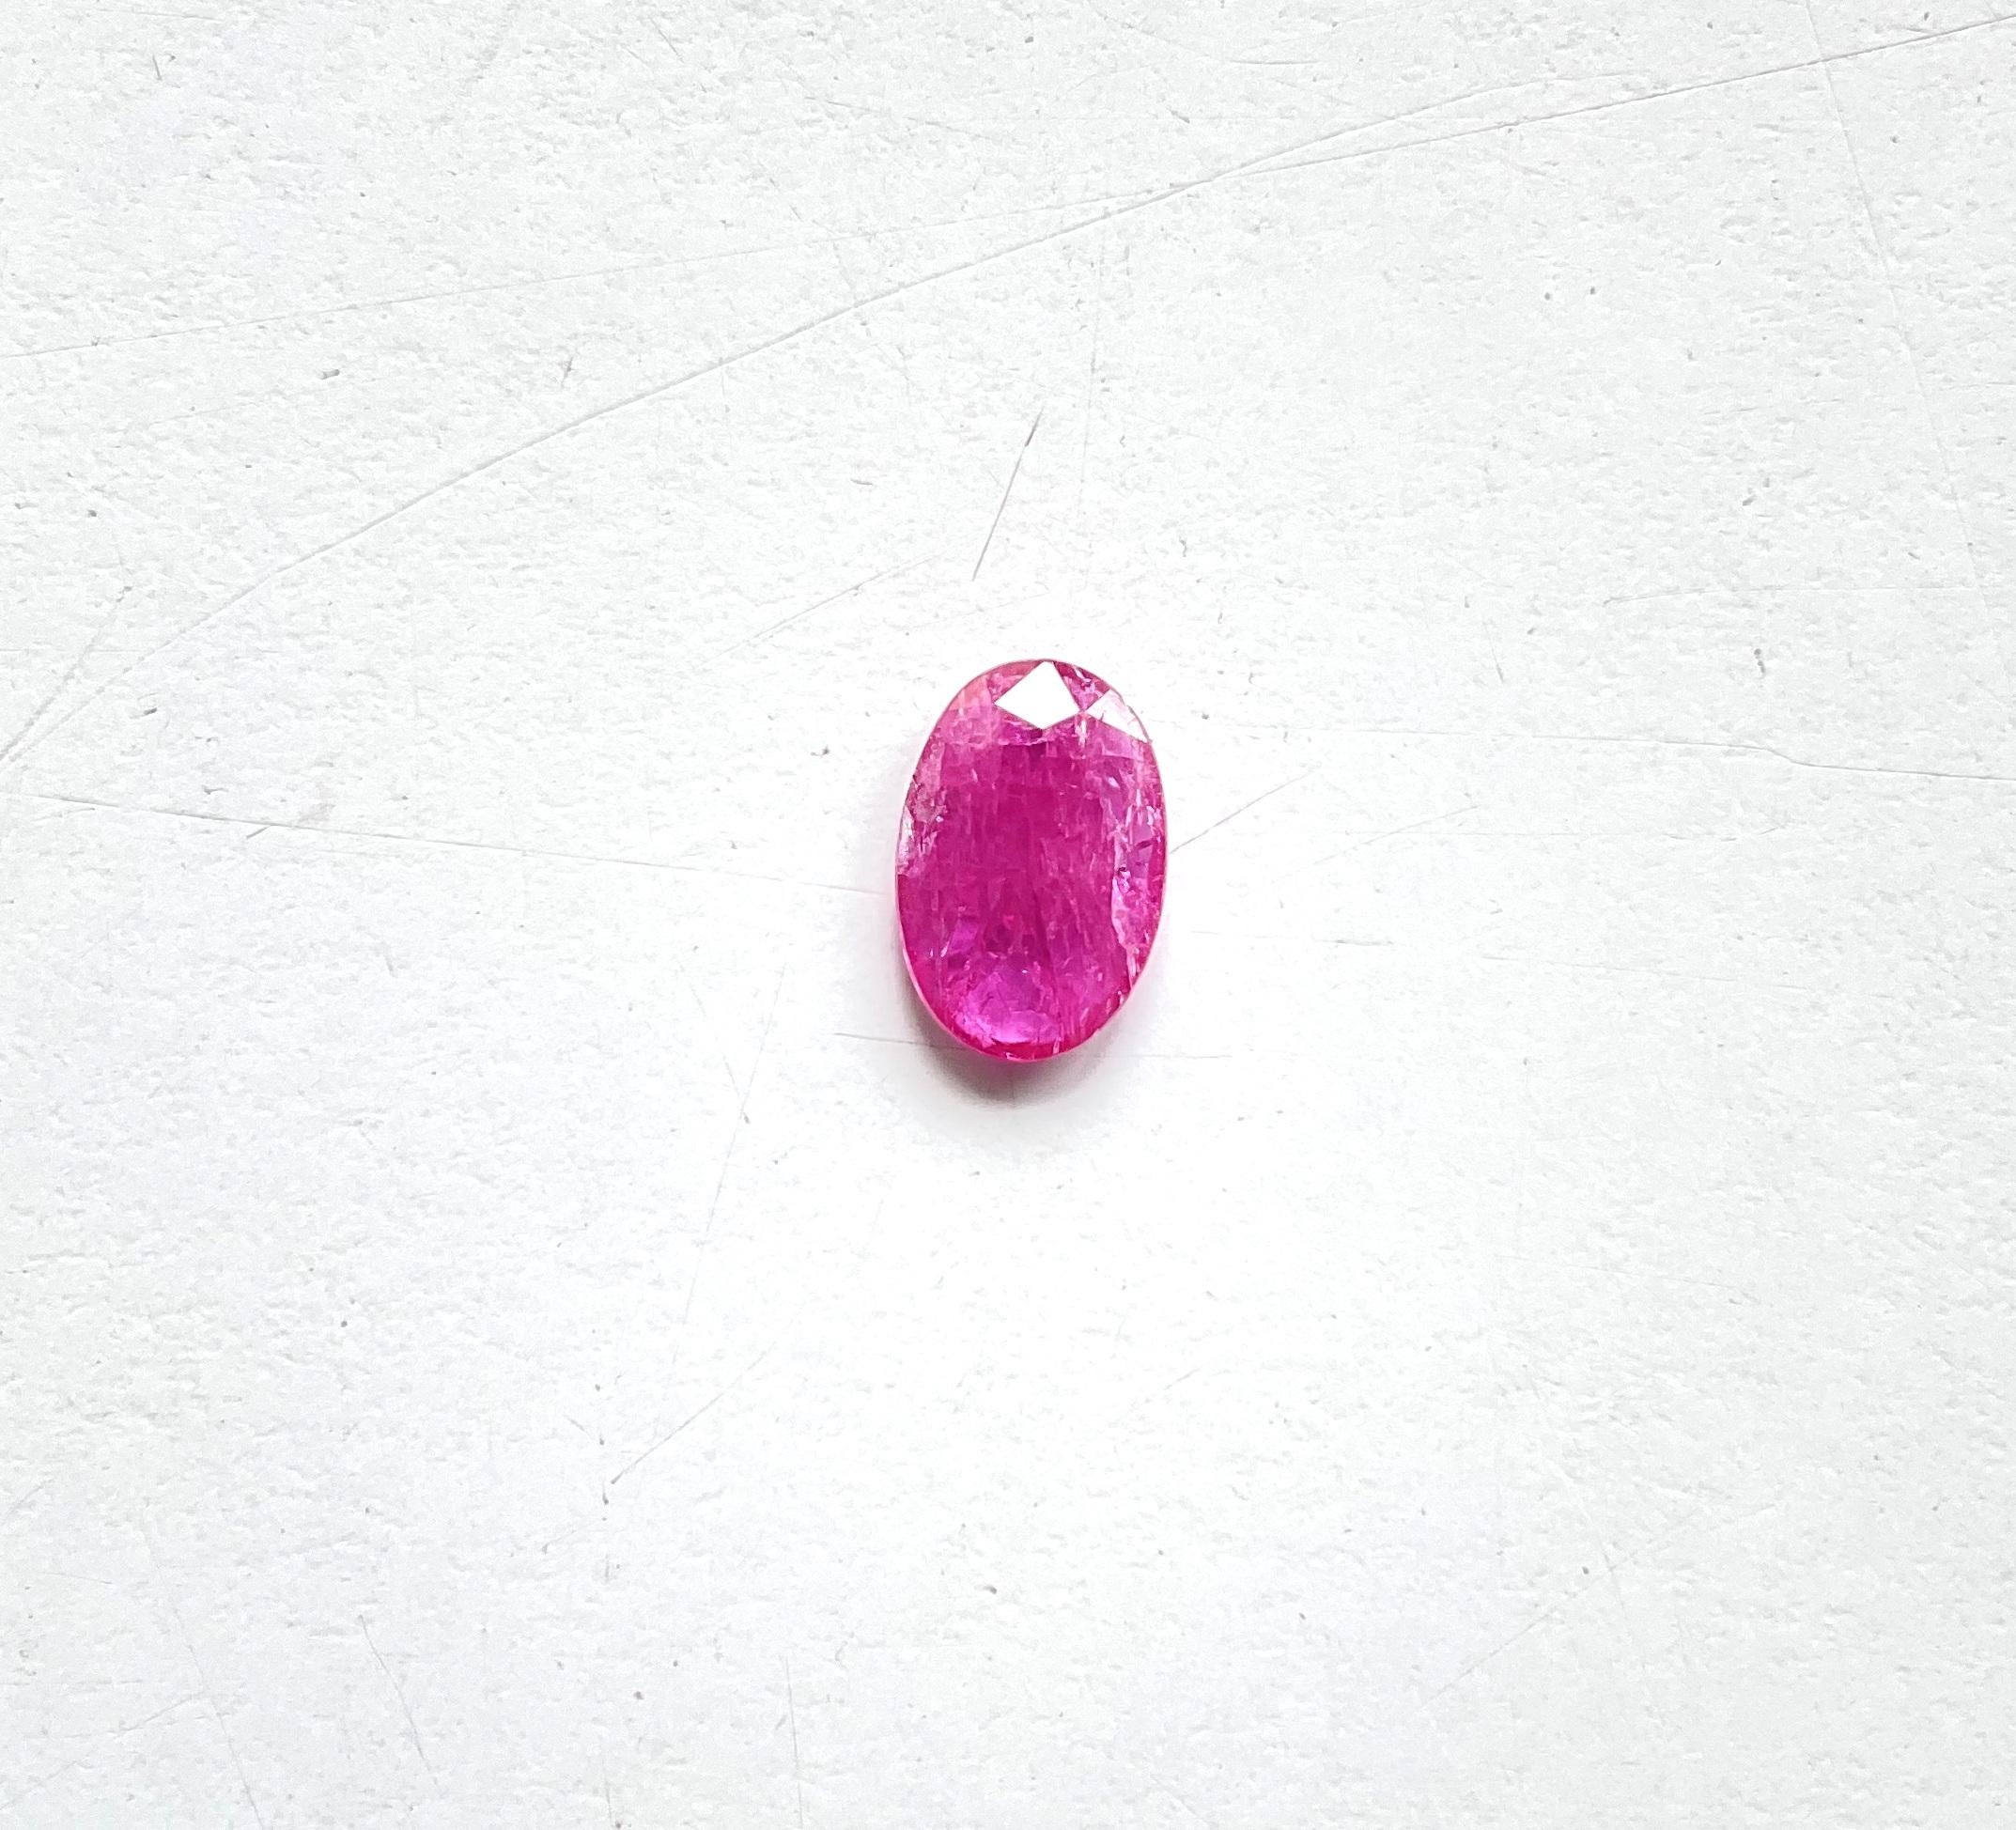 Certified 3.40 Carats Mozambique Ruby Oval Faceted Cut stone No Heat Natural Gem

Gemstone - Ruby
Weight: 3.40 Carats
Size: 11.55x8.64x3.07 MM
Pieces: 1
Shape: Faceted Oval cut stone